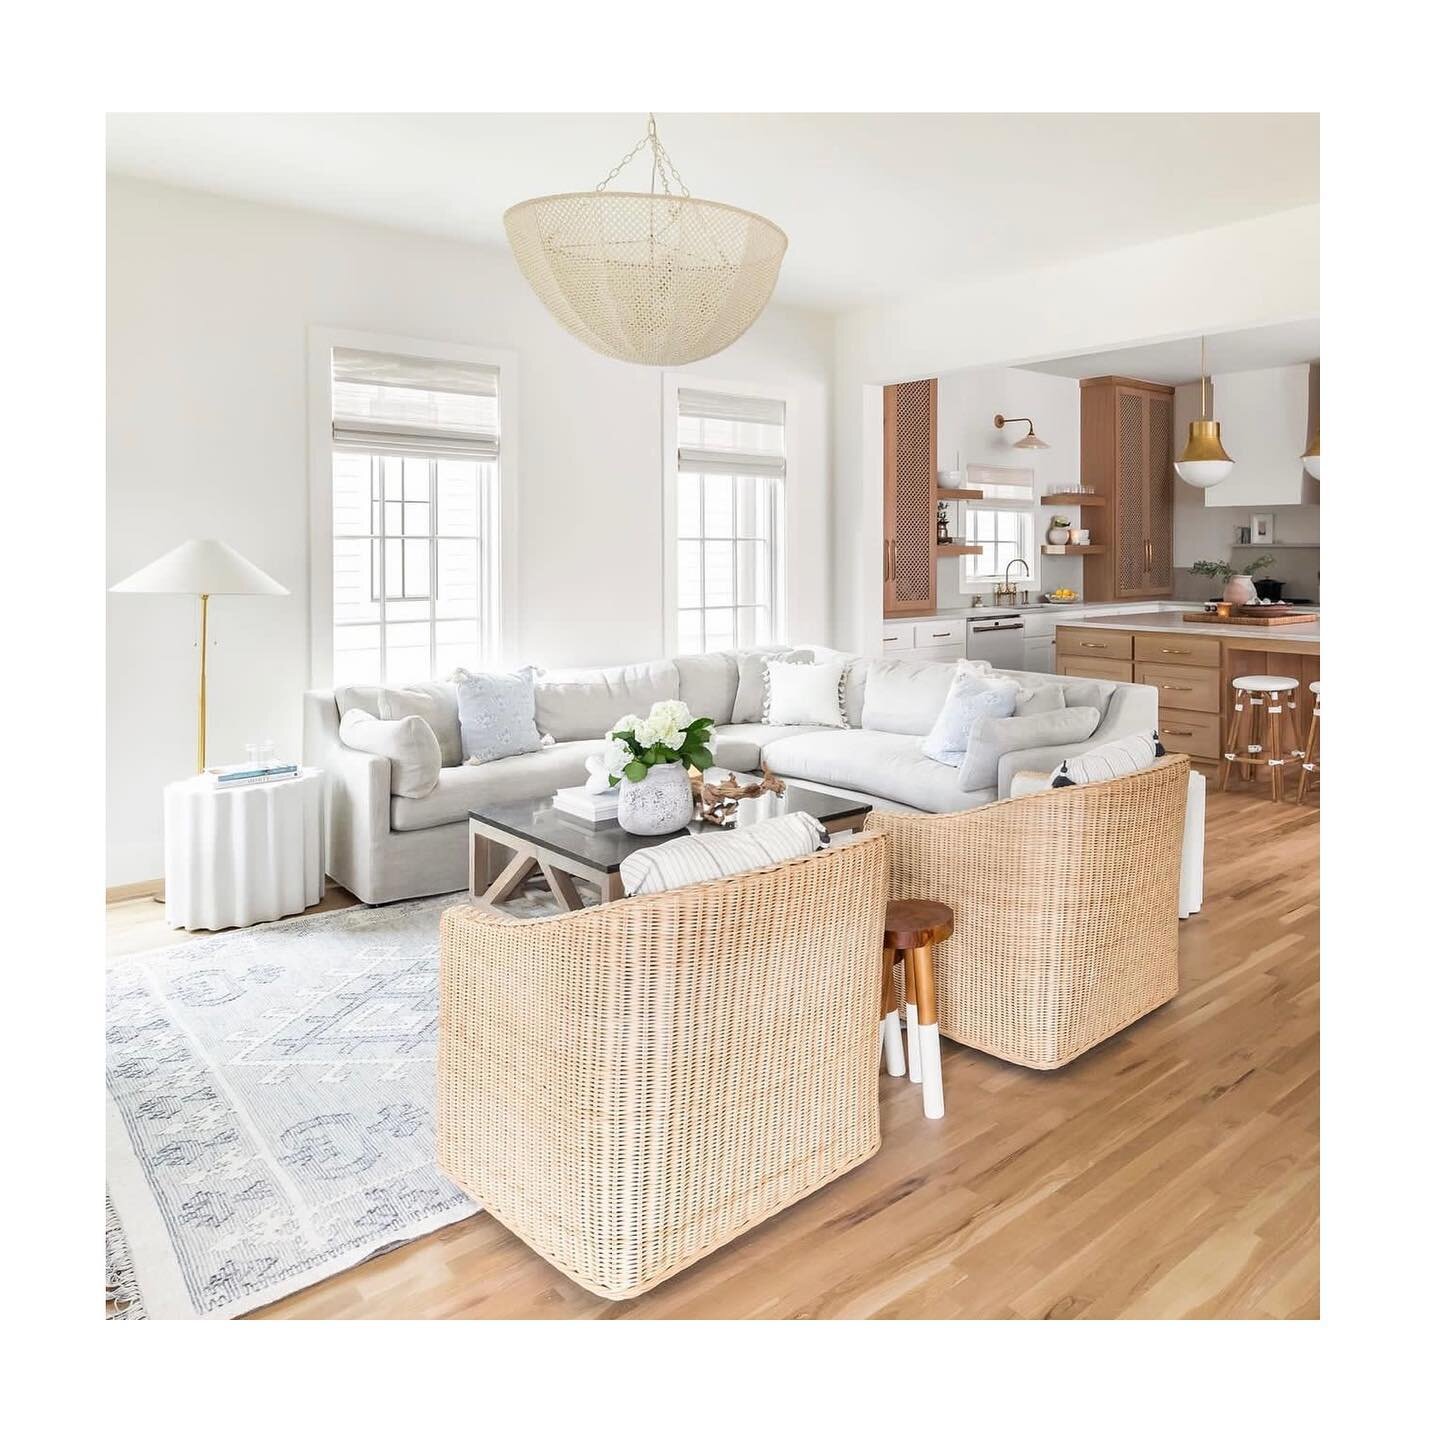 SSDC spotlight on @palacekdesign 🤍Check out this comfy and casual living room designed by @kirstenlileinteriors. The Quinn Chandelier by Palacek adds a touch of cozy elegance and charm. 

📸 @kaceygilpin 

#livingroom #beautifulrooms #chandelier #qu